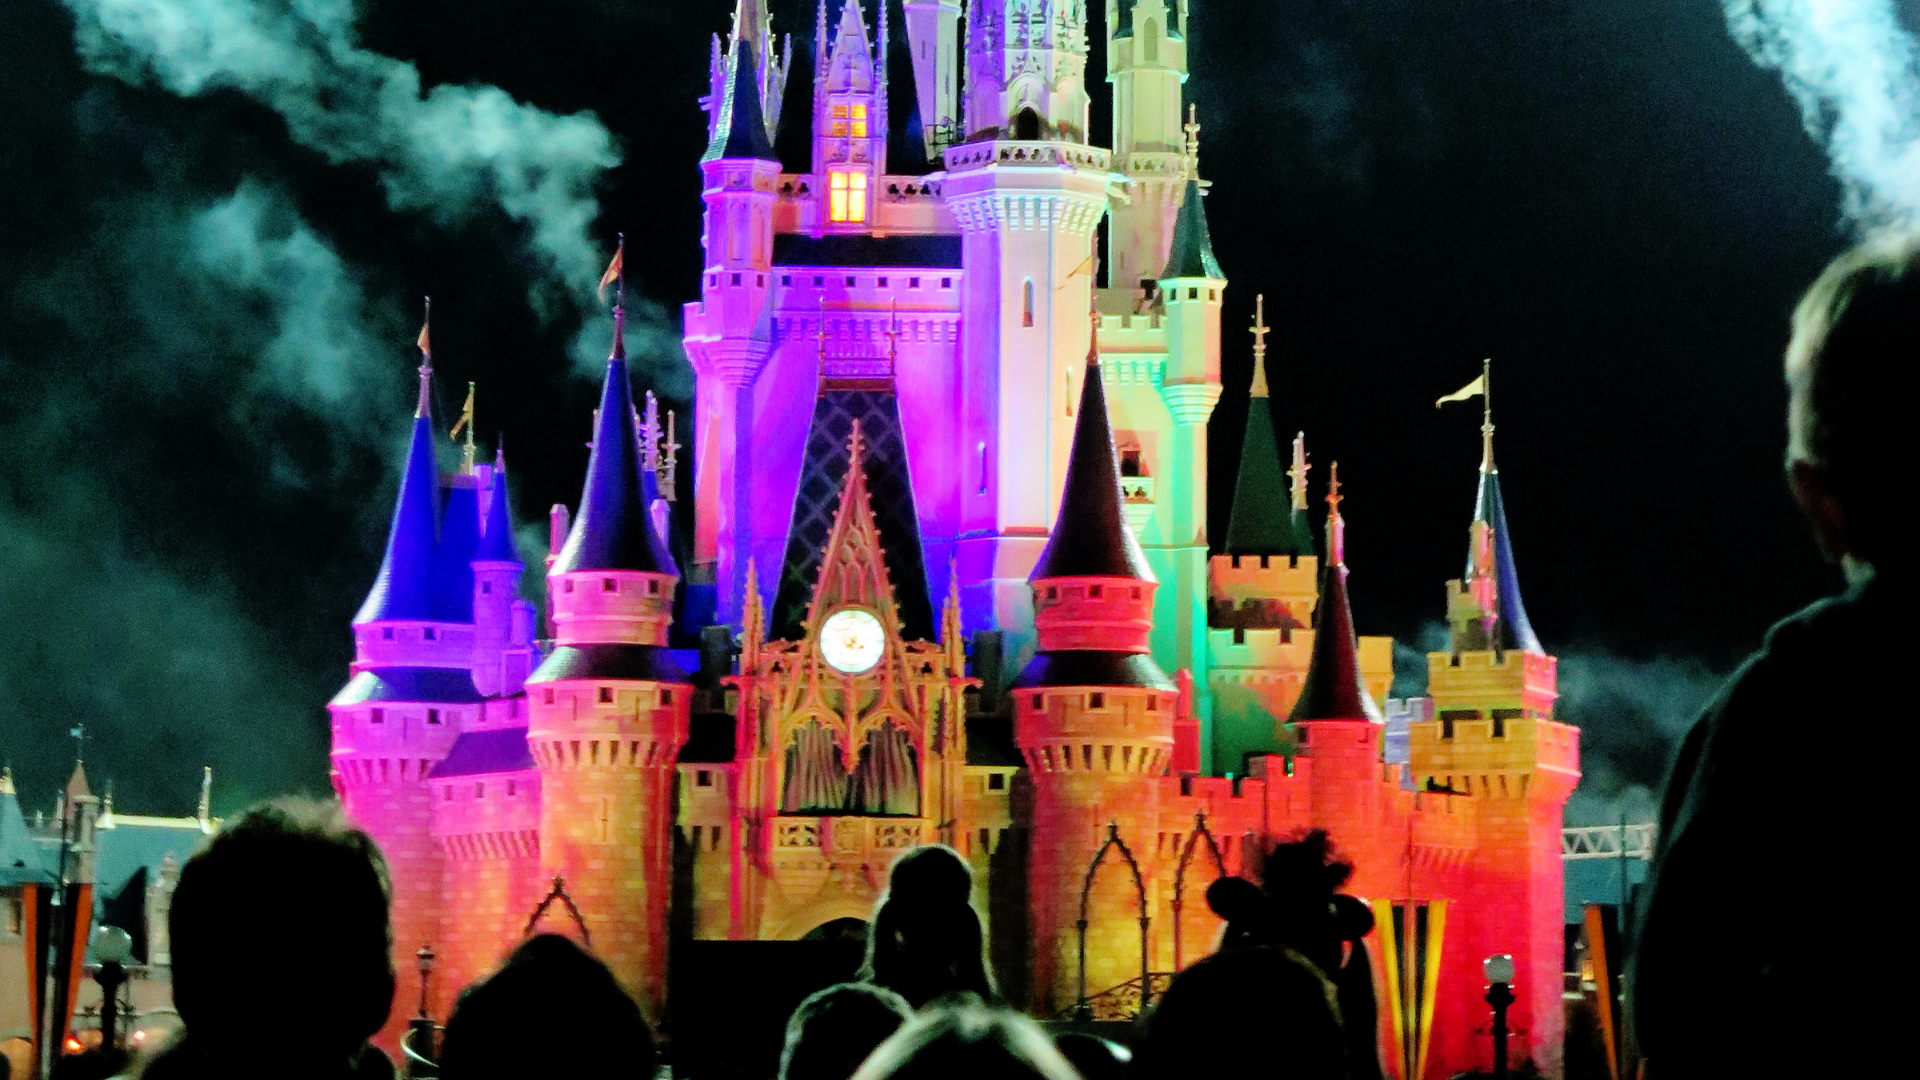 Magic kingdom castle at night, lit up with a crowd in front